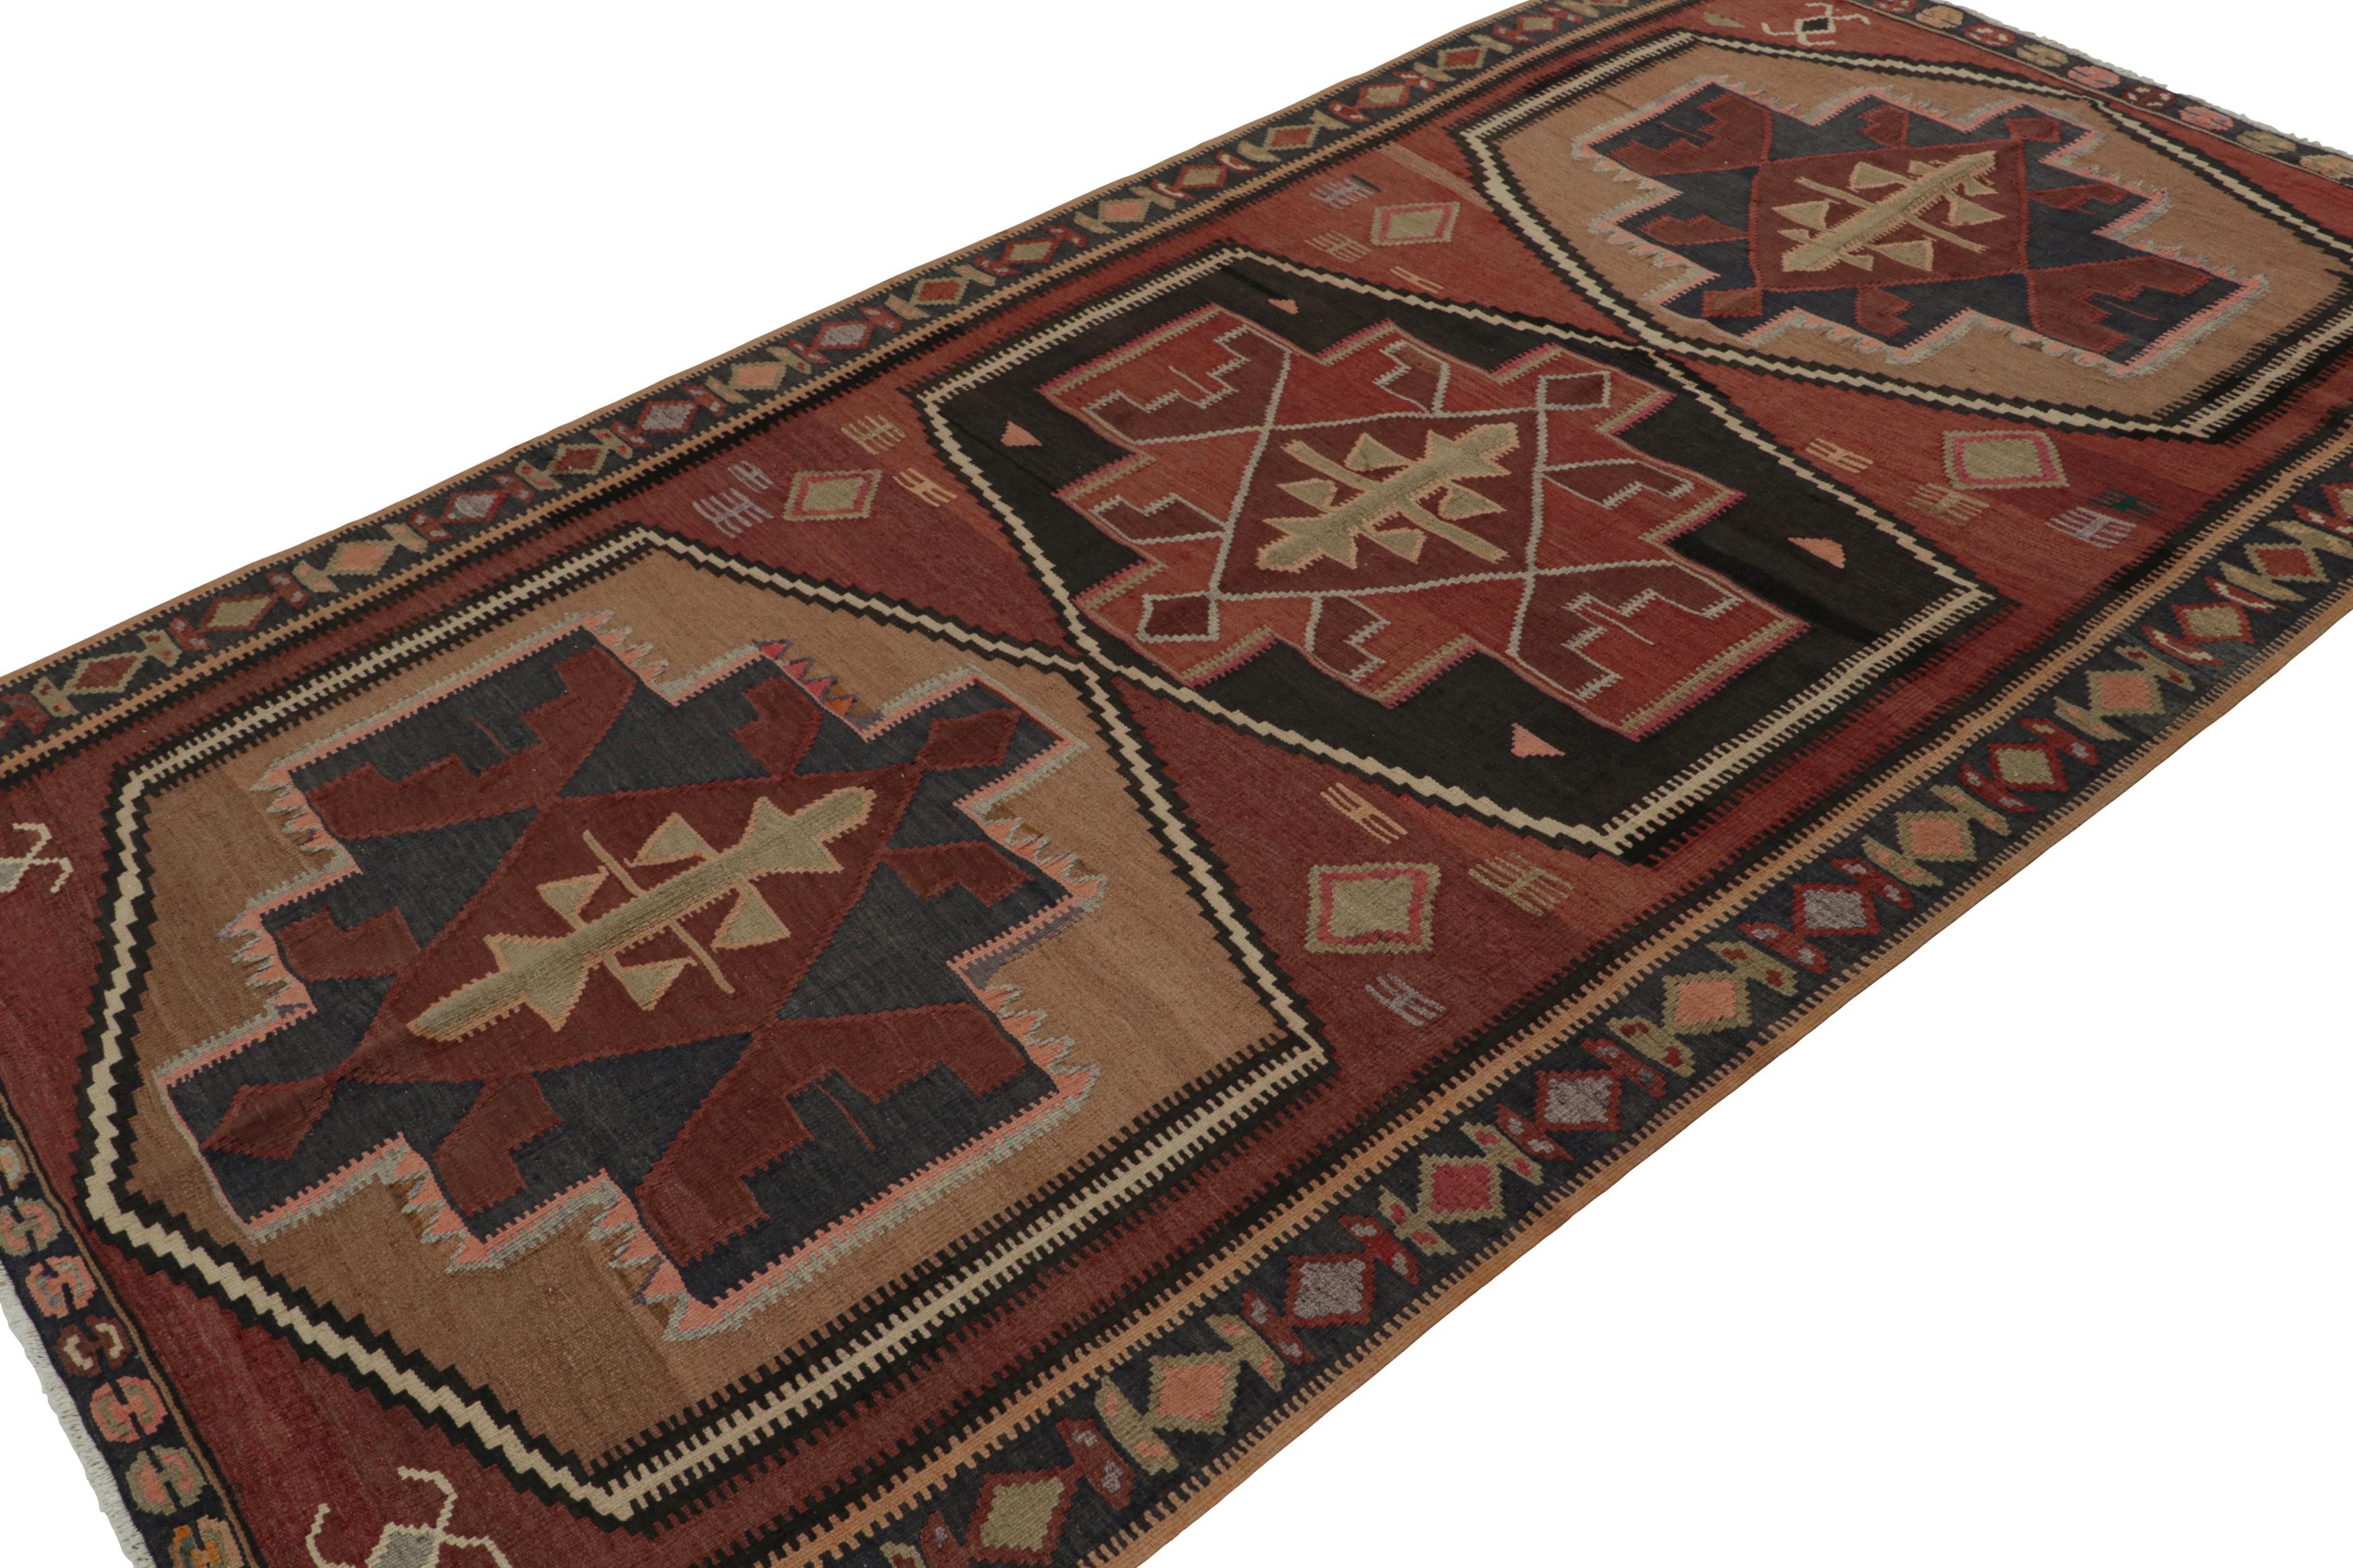 Handwoven in wool, circa 1950-1960, this 5x9 vintage tribal Afghan kilim rug features large-scale medallions with geometric patterns in playful accents of red, blue, and subtle tones of beige/brown and green. 

On the Design: 

Connoisseurs will